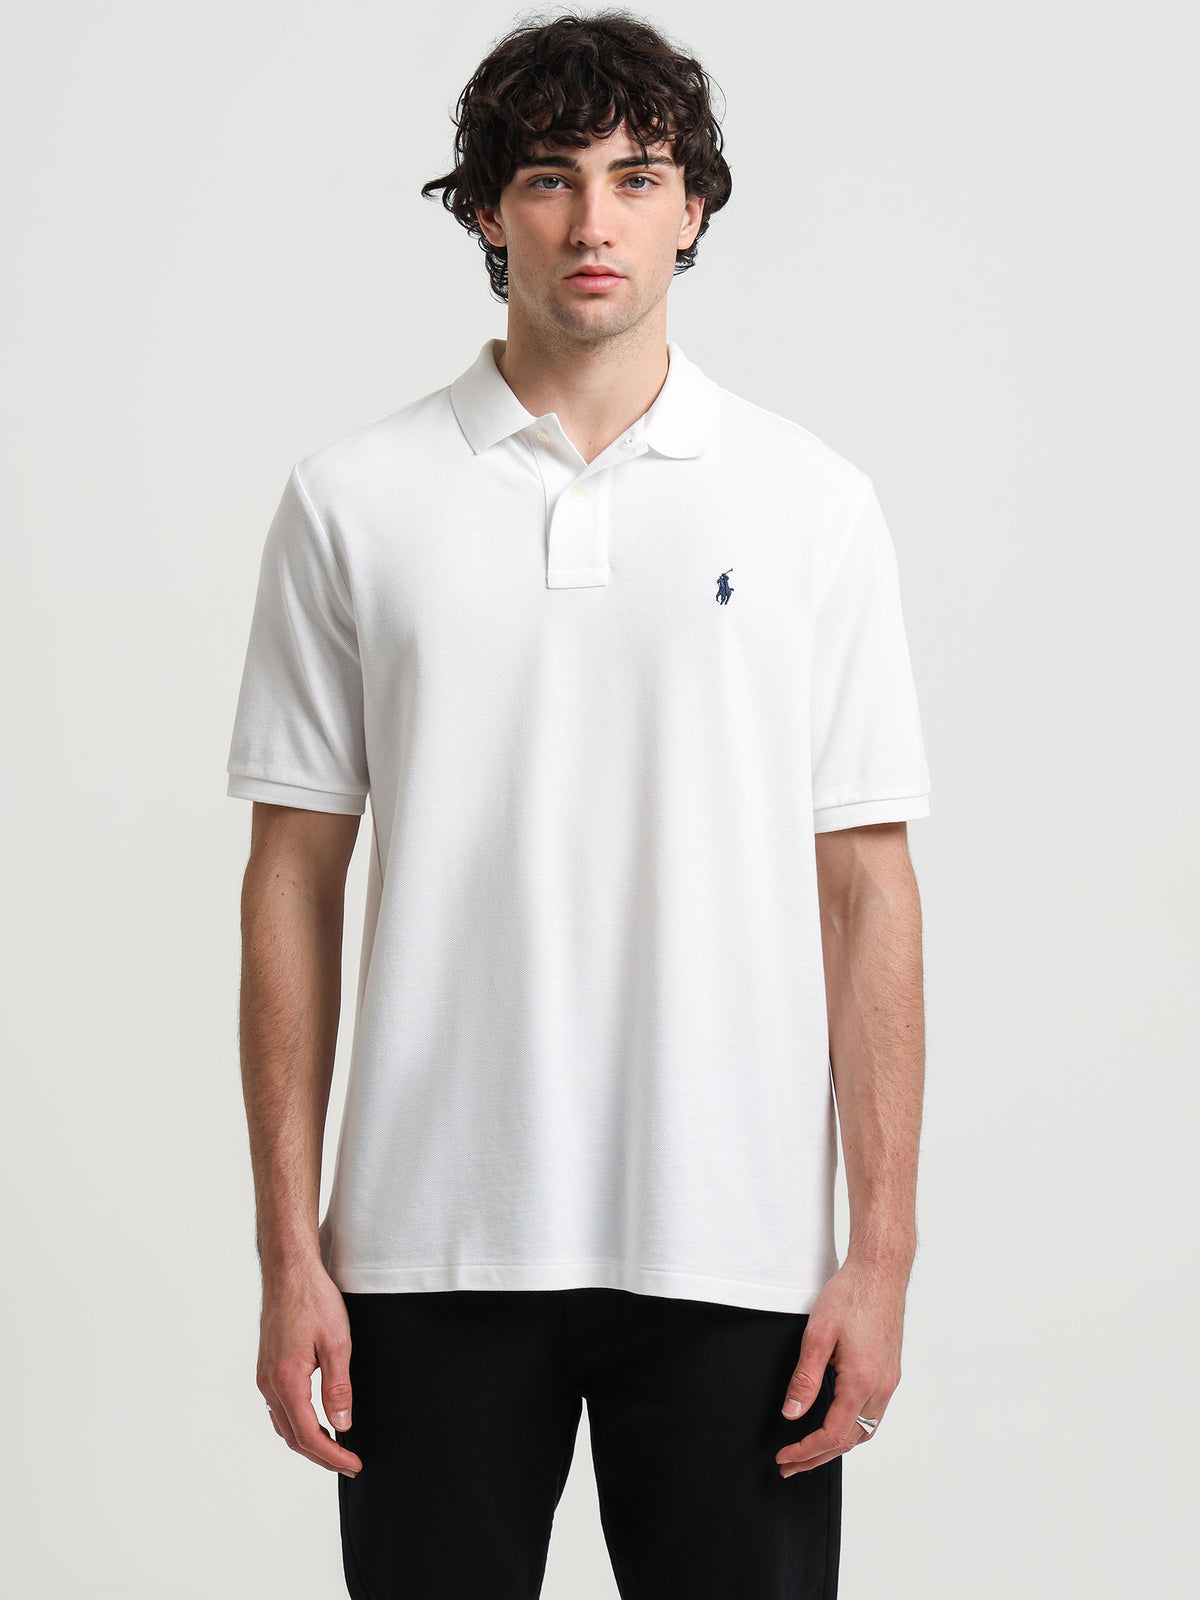 Classic Fit Mesh Polo in White